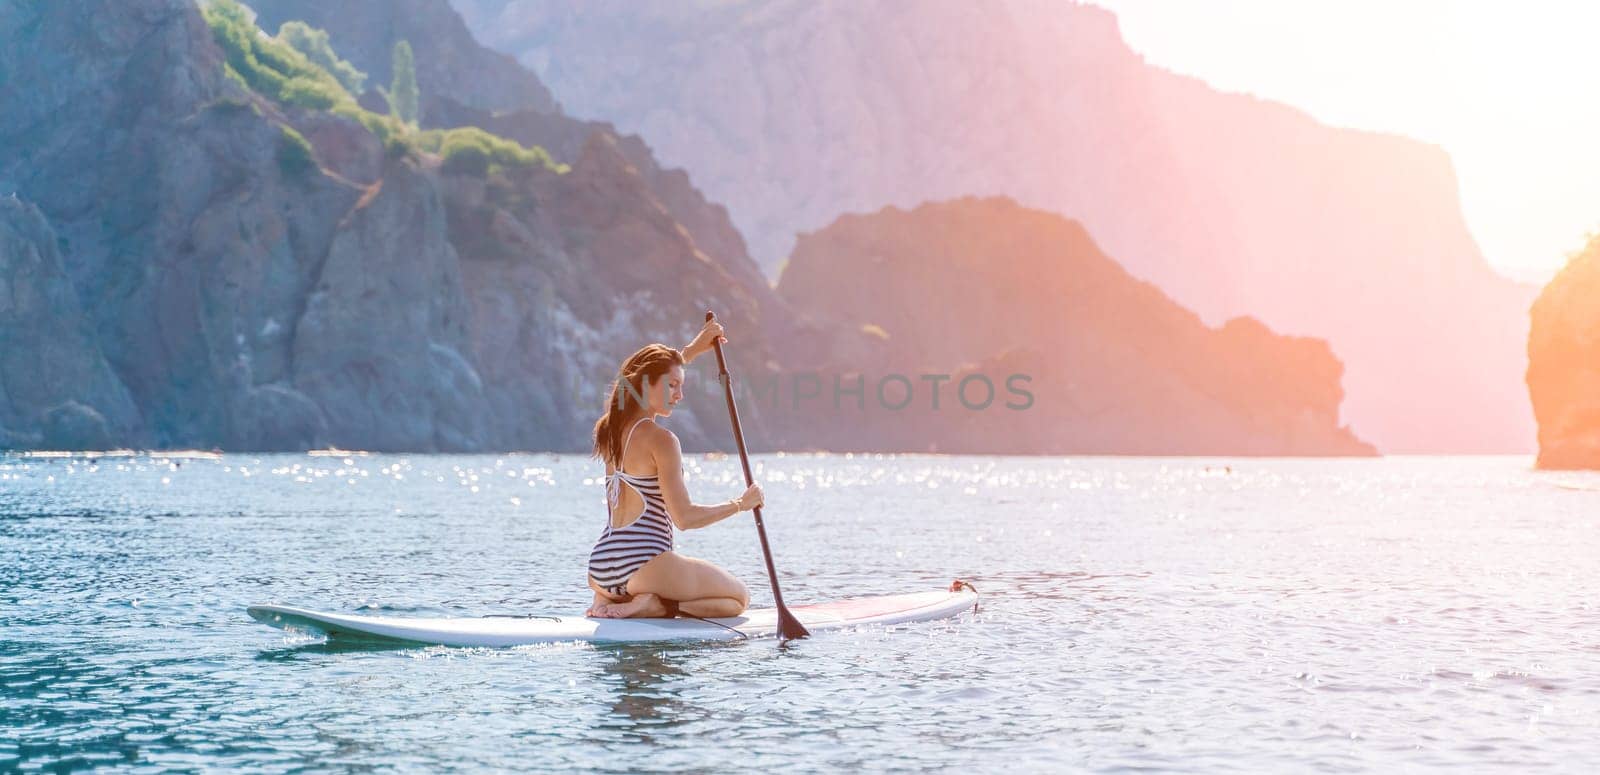 Woman summer surfing on the beach: A sporty girl in a striped swimsuit rides the waves on a surfboard on a sunny summer day at the beach, enjoying the fun and excitement of surfing